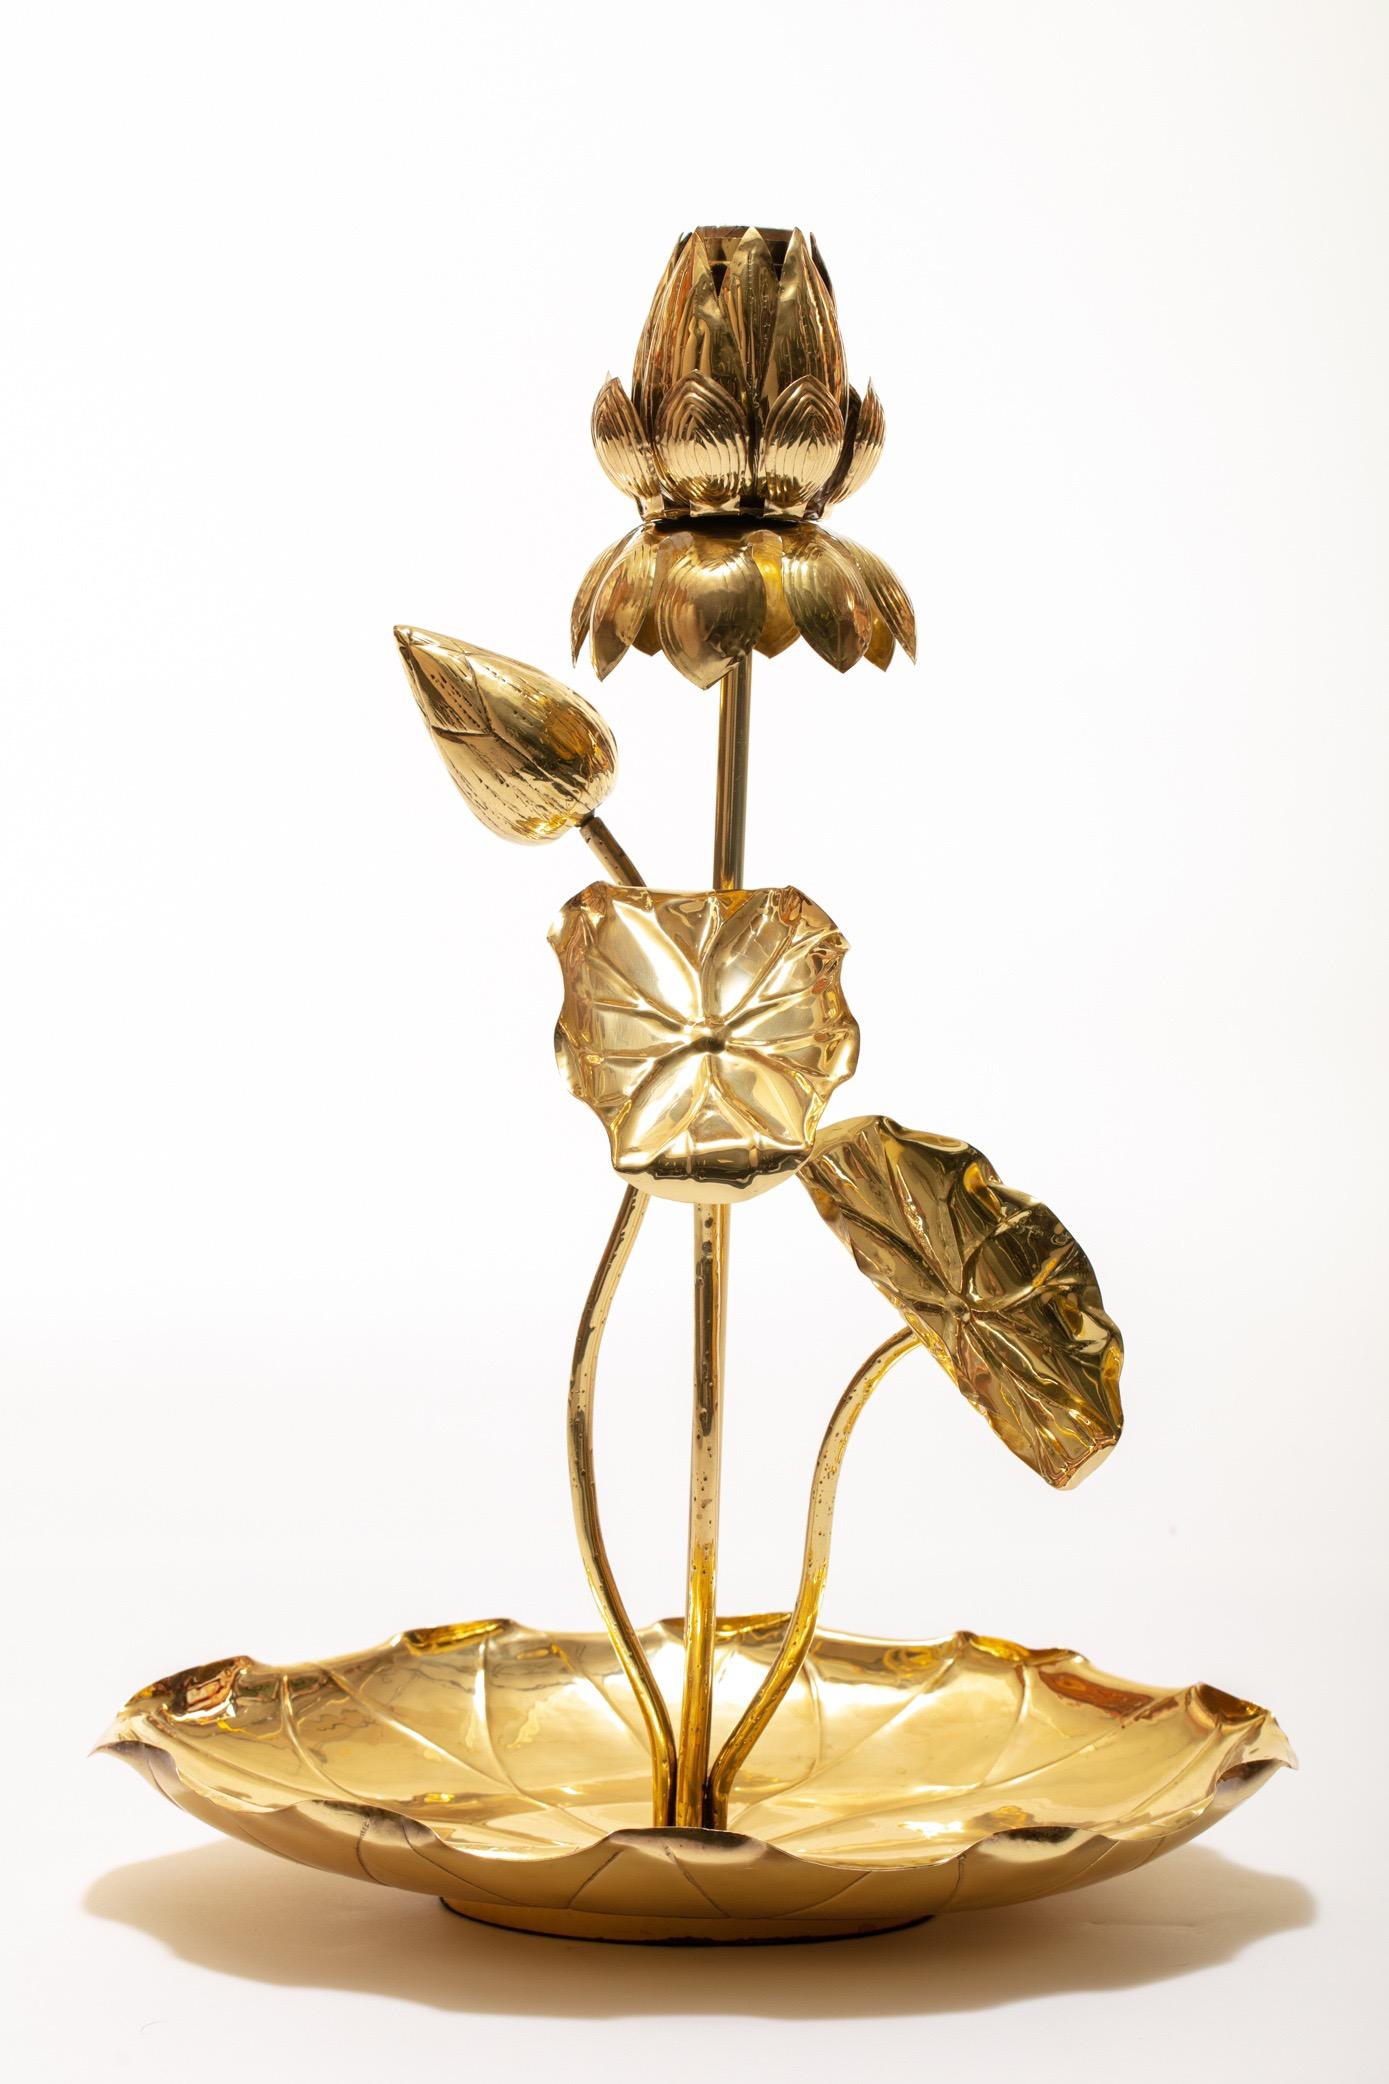 Sculptural brass lotus flower lamp by Feldman Lighting Company often described as in the style of Tommi Parzinger. When originally sold, Feldman lotus lamps were customized to the buyer's taste - one could select the number of branches and